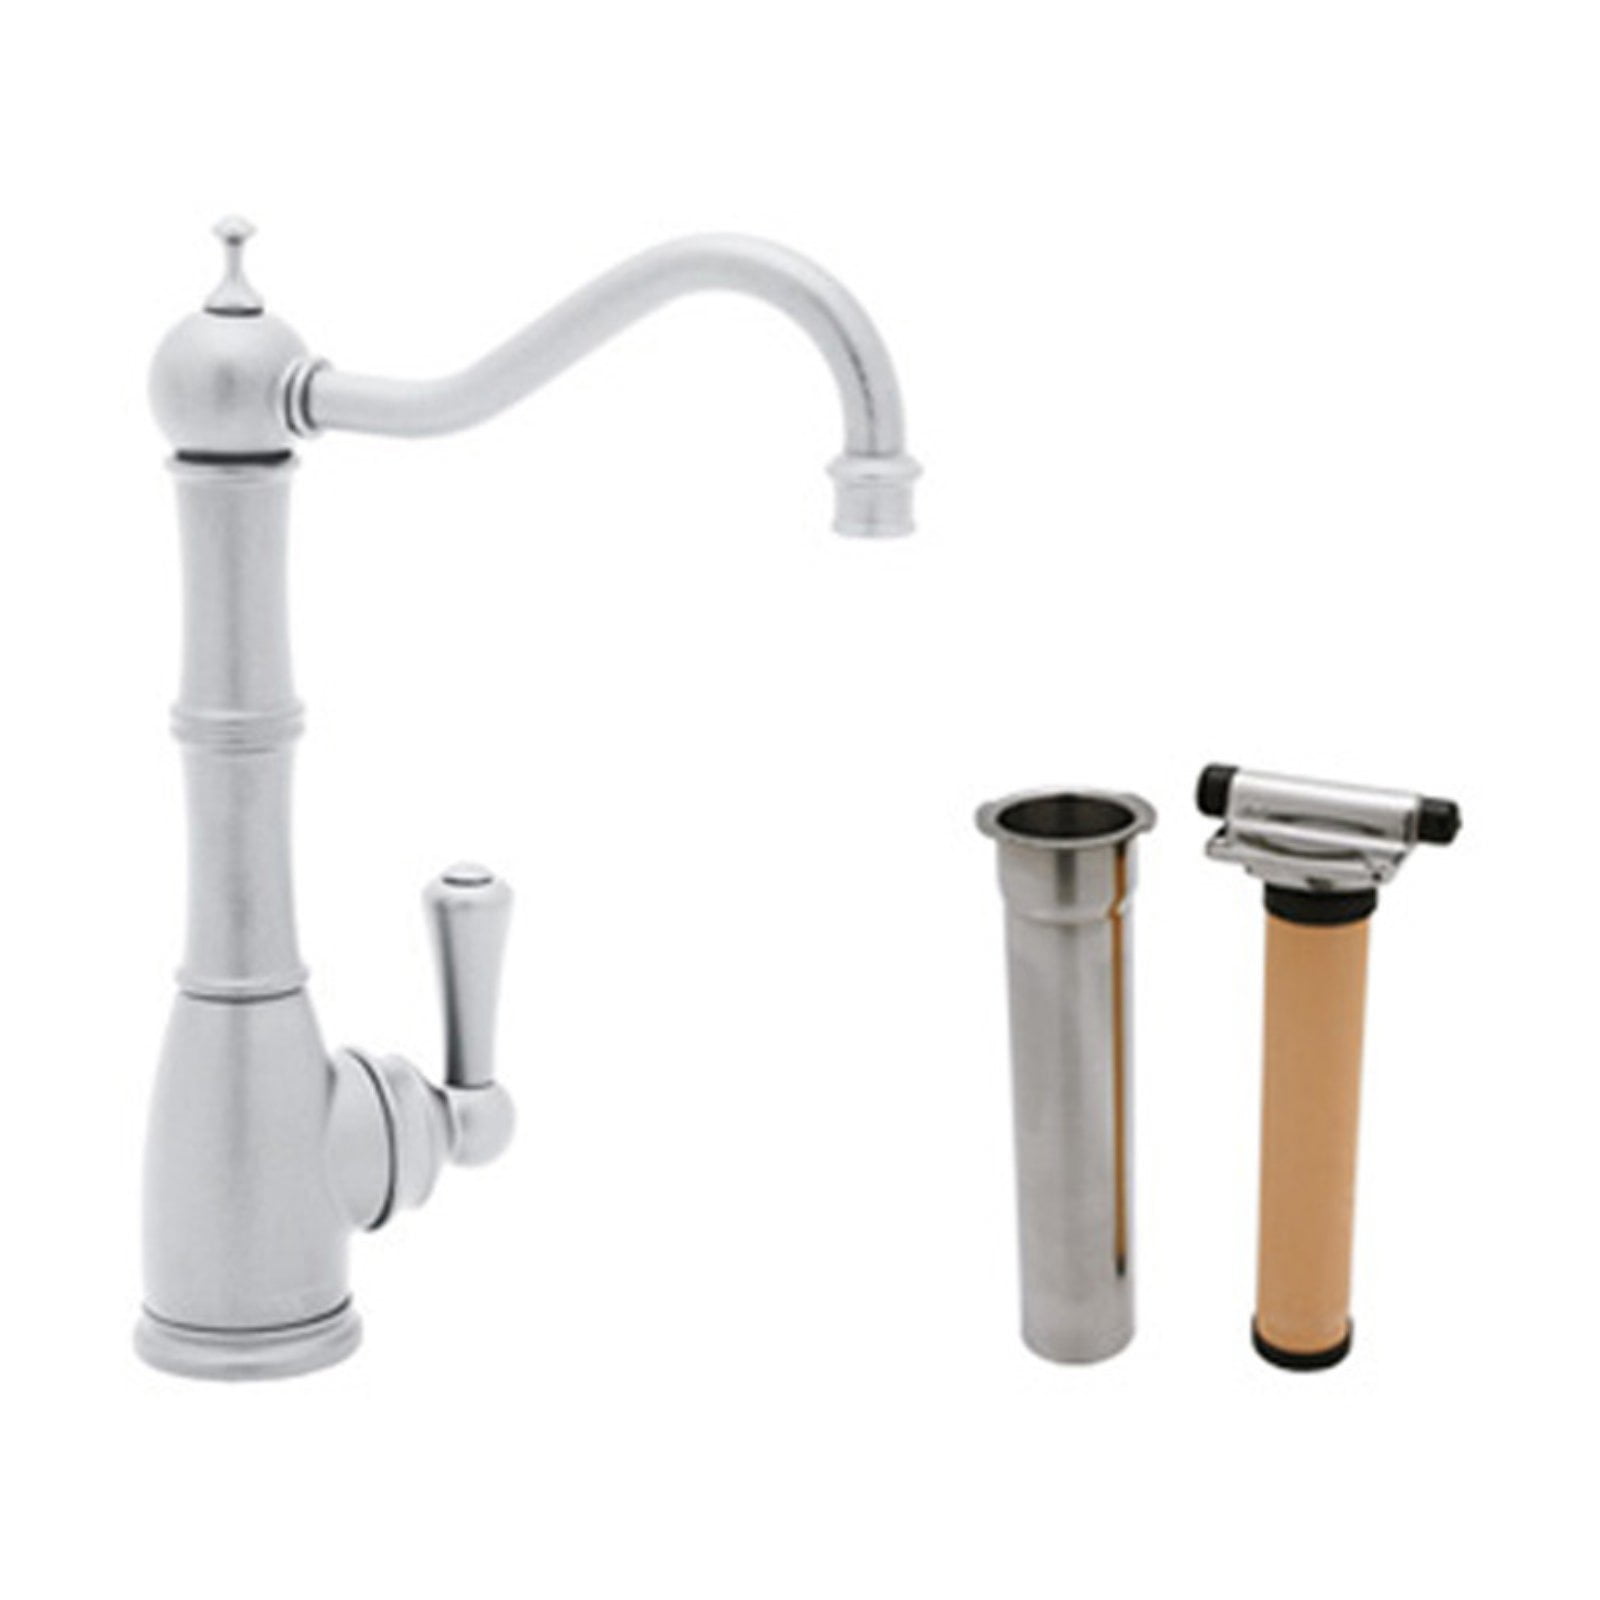 Rohl Ukit1621 Perrin And Rowe Filtering Kitchen Faucet Available